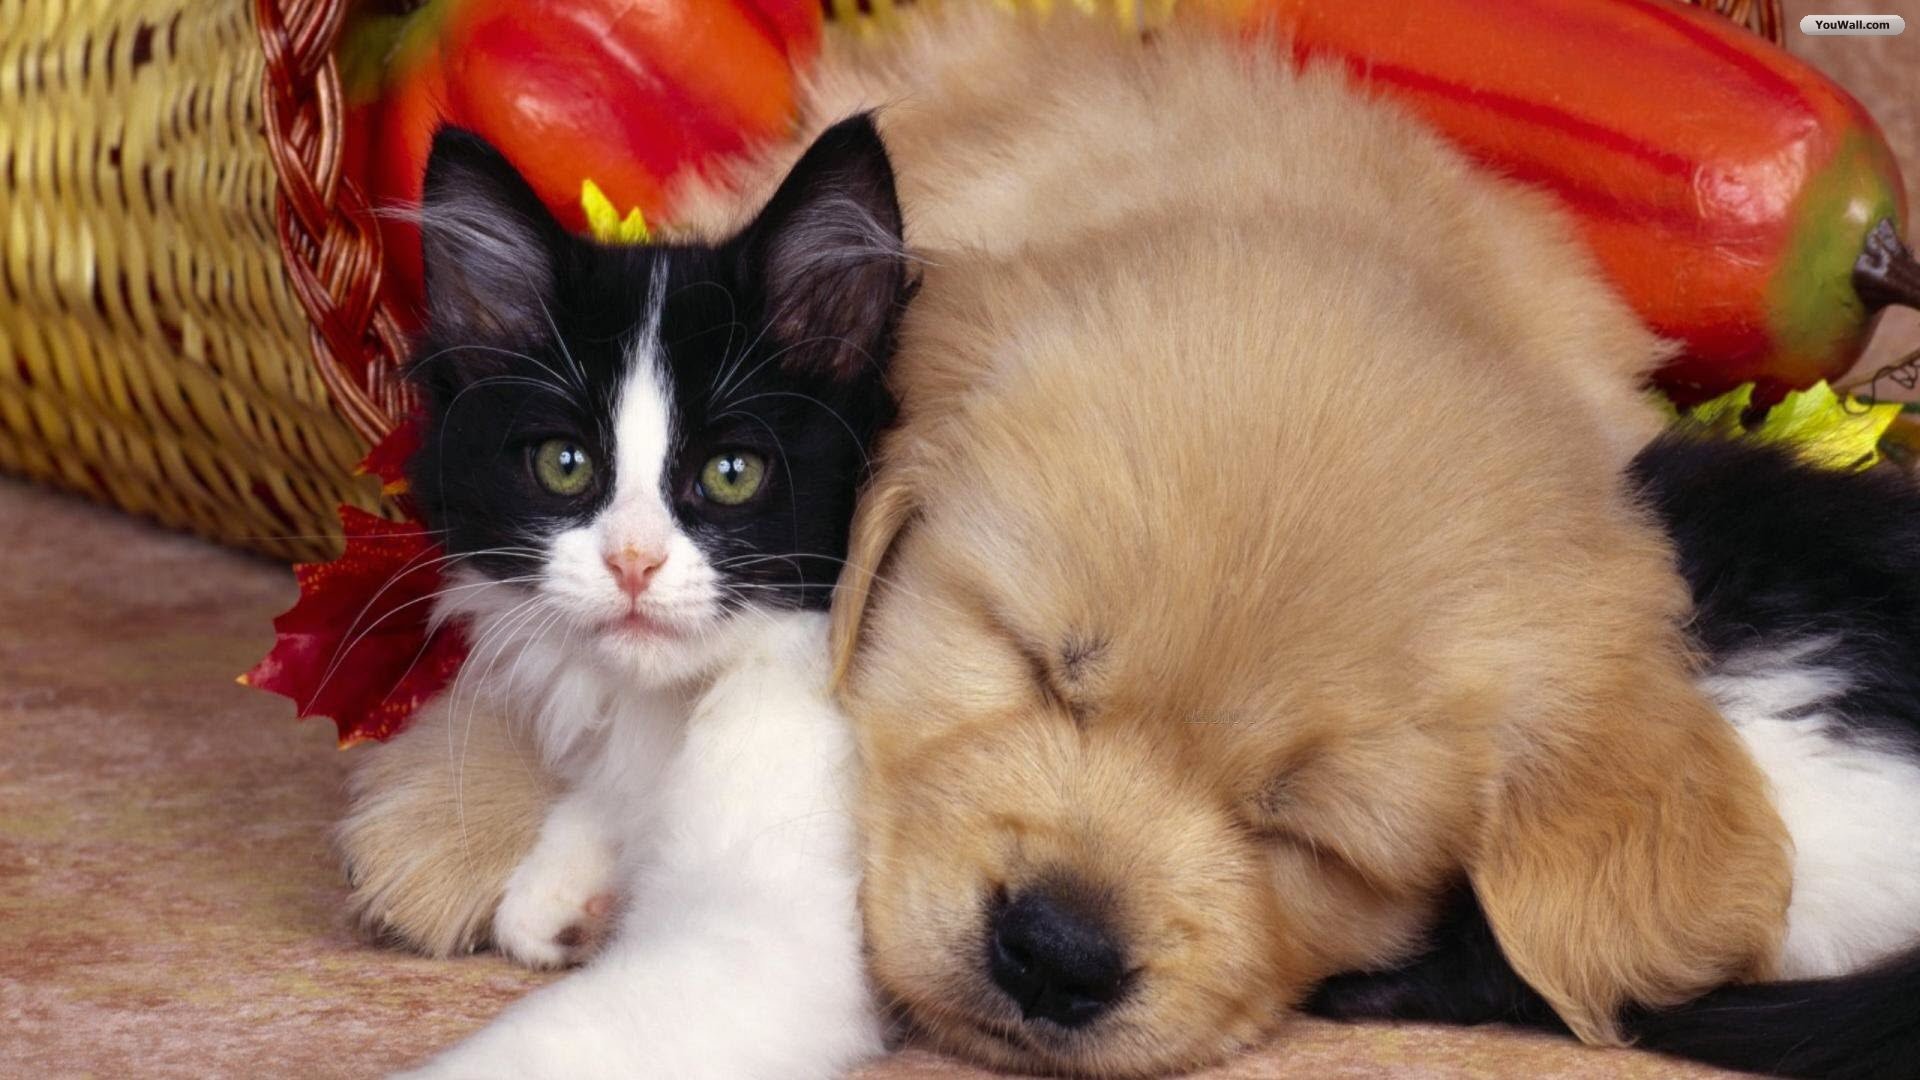 1920x1080 Cute Cats & Dogs Wallpapers Images Free Download For Desktop